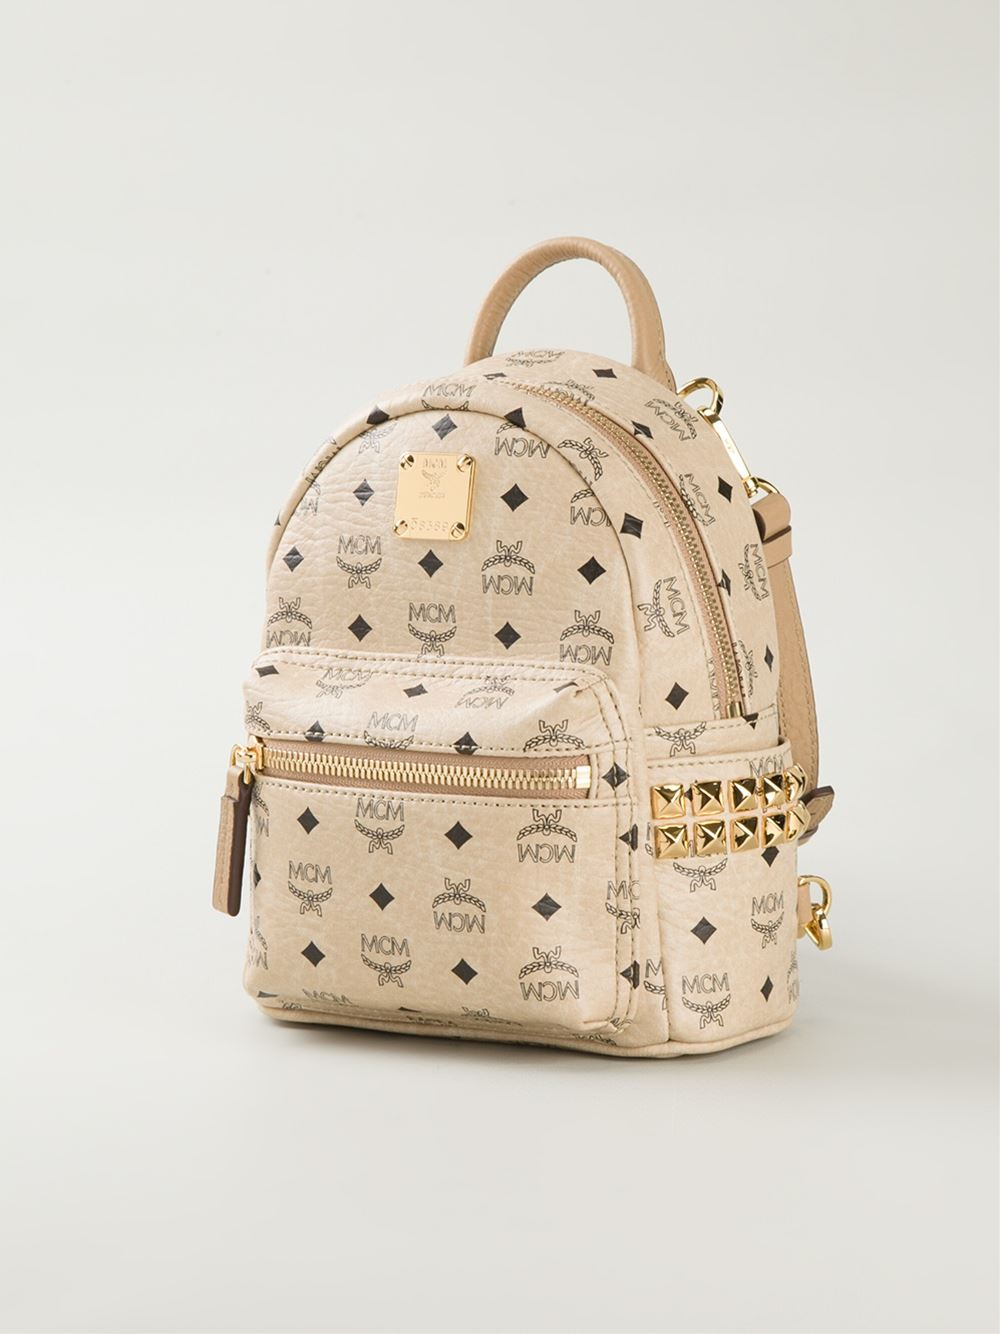 SAMthing Fab By Yeng - Original Vs Fake Both tag AT-B1212 (Mini PU Backpack)  Color both Beige ✓ please be inform na wala pong Mall pullout si Anello,  Wala pong Authentic Quality